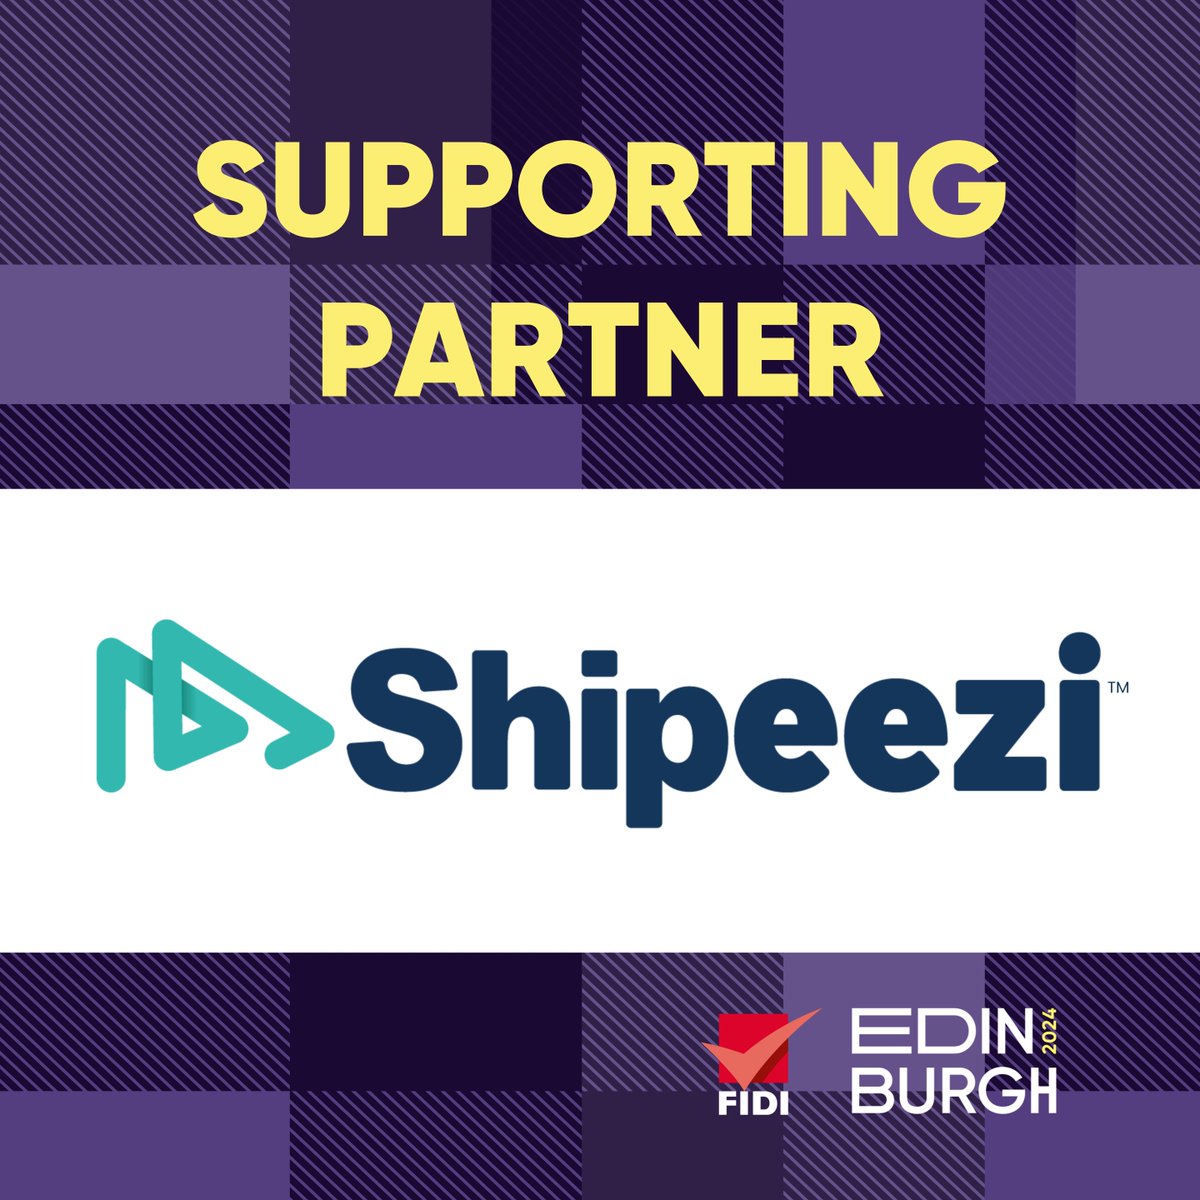 🌍 #2024FIDIconference: Thank you, @getshipeezi, for being a partner of the 2024 FIDI Conference in Edinburgh! 📱Get the app to connect with attendees, book meetings & view your agenda : 🔶Google Play Store ➡ lnkd.in/e86wv6Jv 🔶Apple App Store ➡ lnkd.in/e7XJ6xun